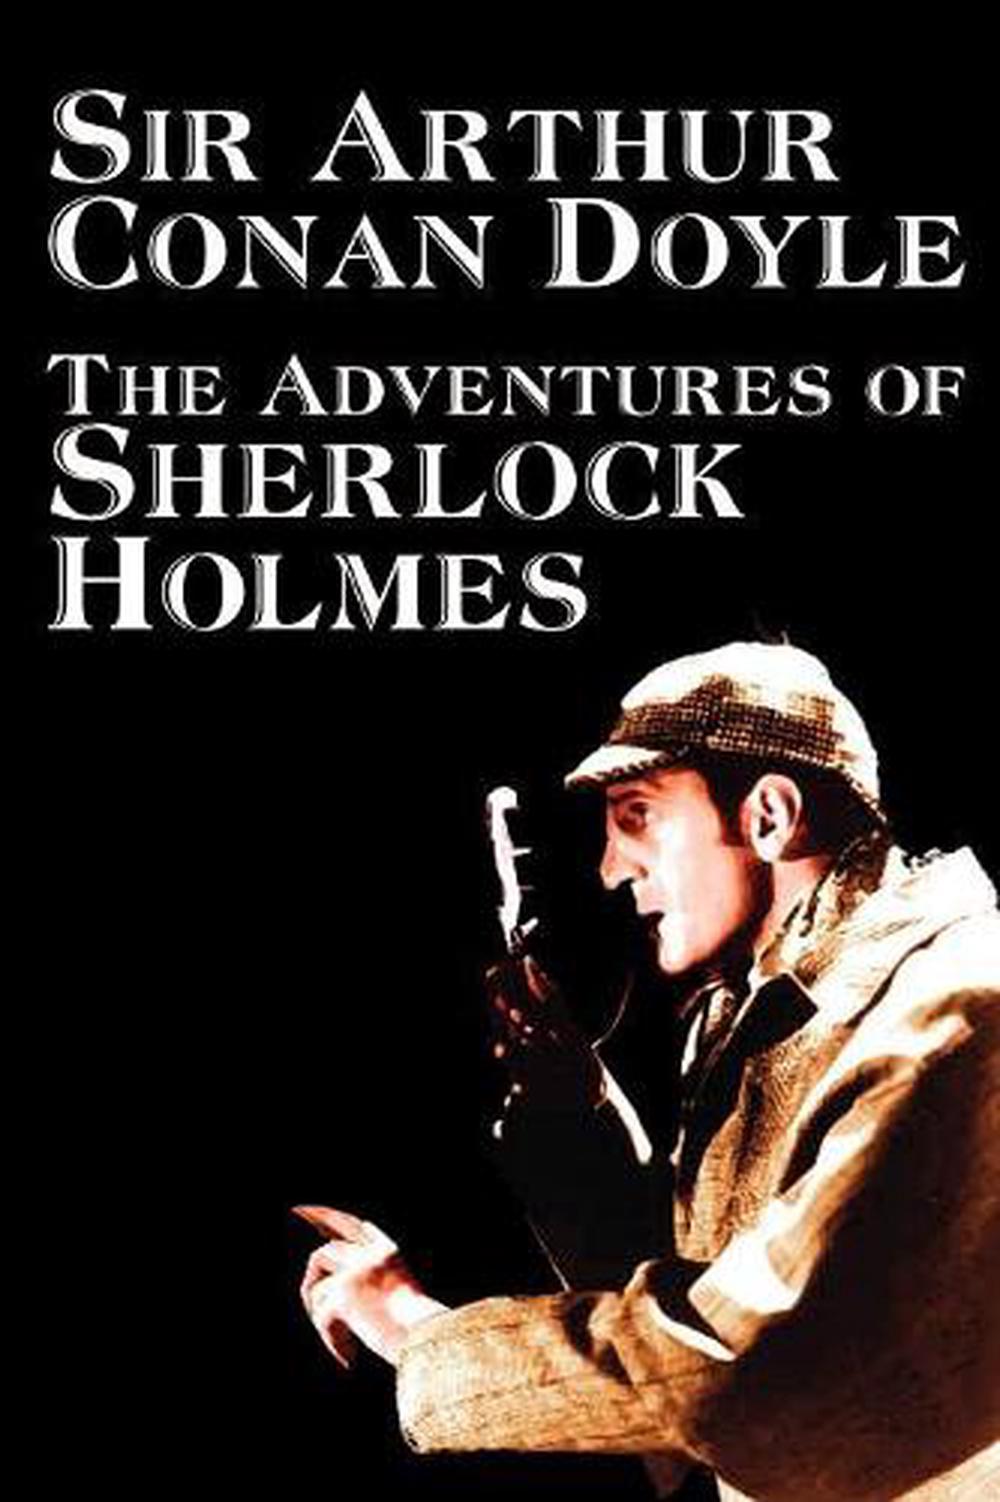 The Further Adventures of Sherlock Holmes by Richard L. Boyer